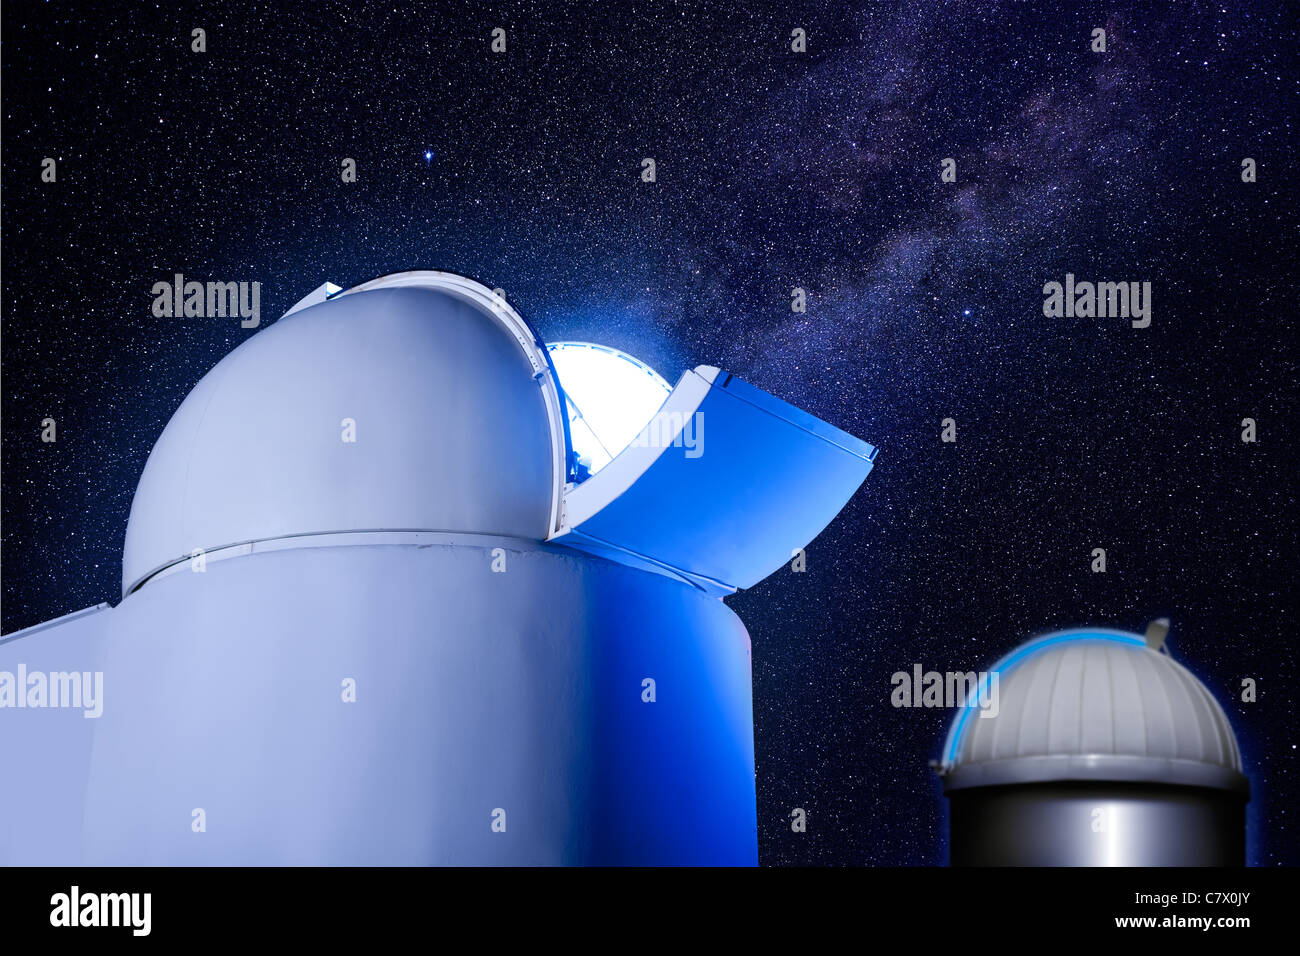 astronomical observatory dome in night with stars and glowing light Stock Photo